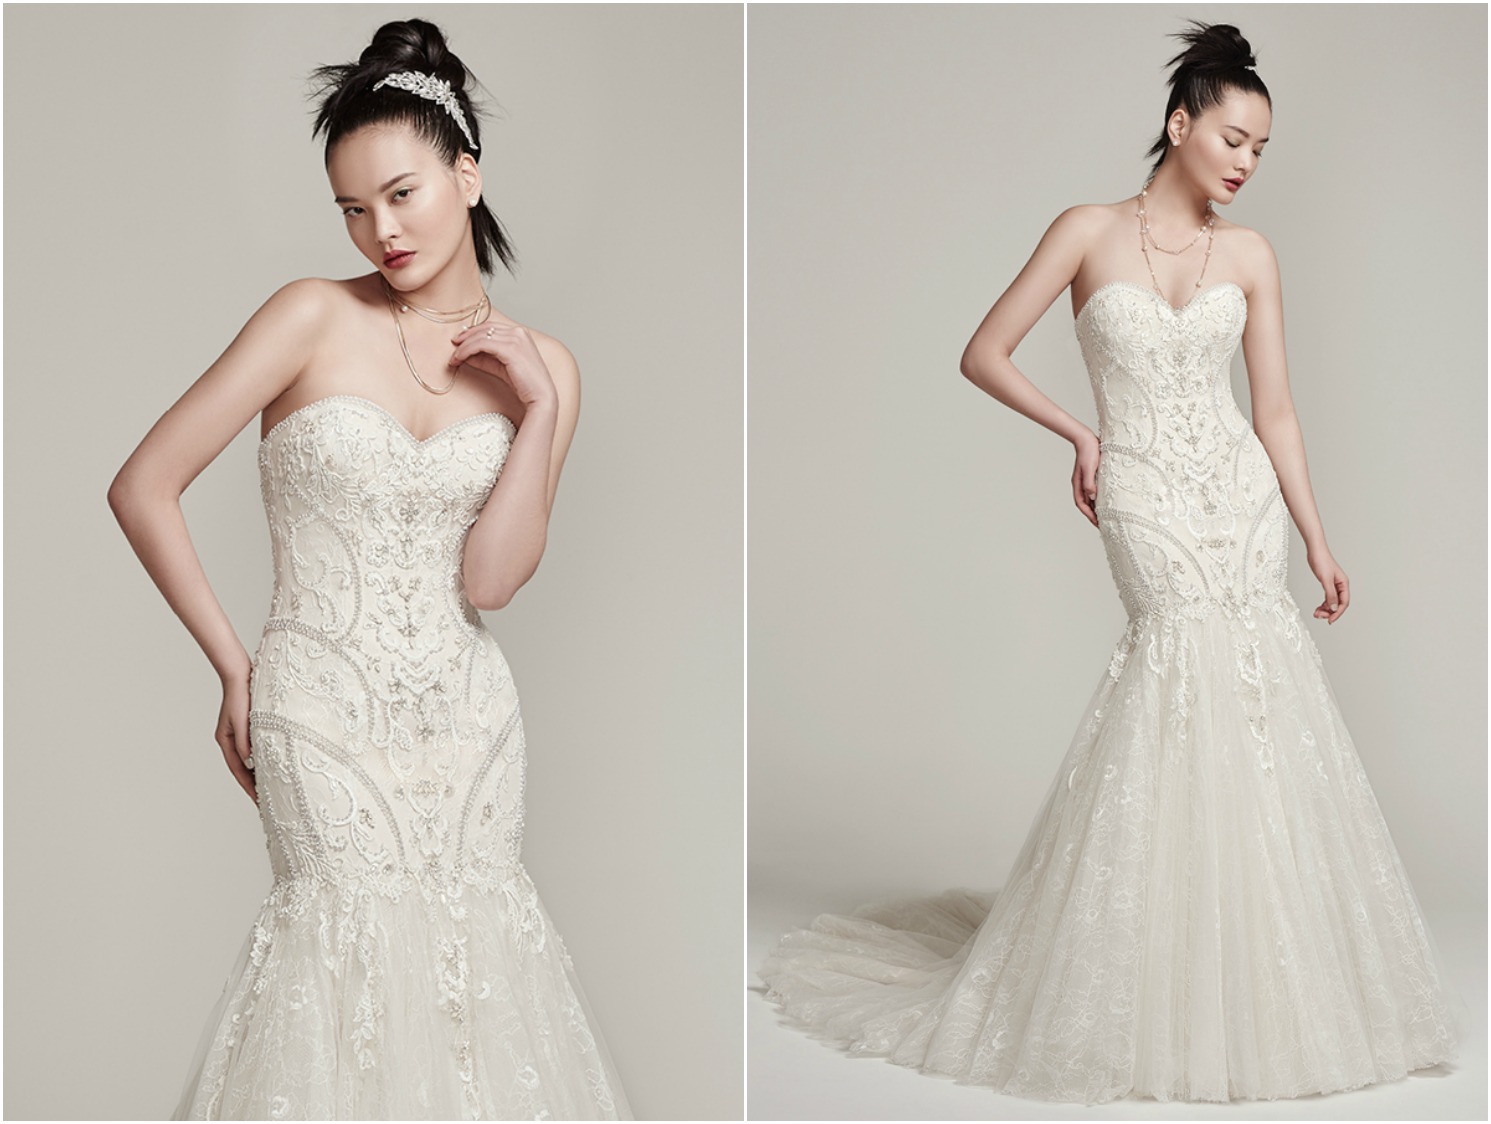 Modern beading featuring Swarovski crystals decorates the fitted bodice of this ultra-feminine  all over lace fit and flare wedding dress, complete with soft sweetheart neckline and weightless tulle and lace skirt. Finished with illusion lace back and covered buttons over zipper closure. 

<a href="https://www.maggiesottero.com/sottero-and-midgley/nina/9875" target="_blank">Sottero &amp; Midgley</a>